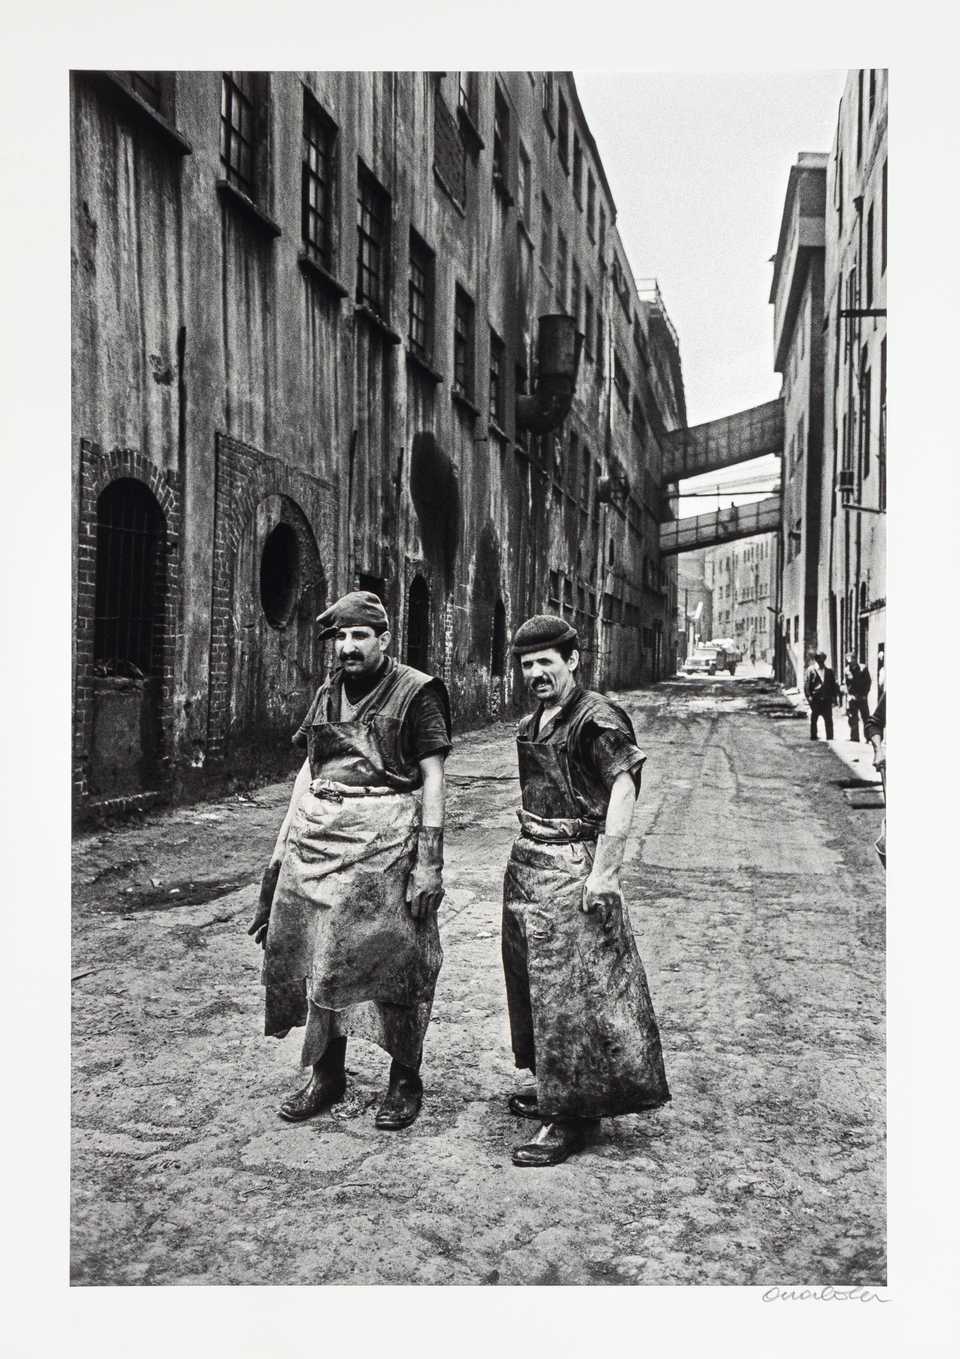 “Leather workers at Kazlicesme,” 1990.